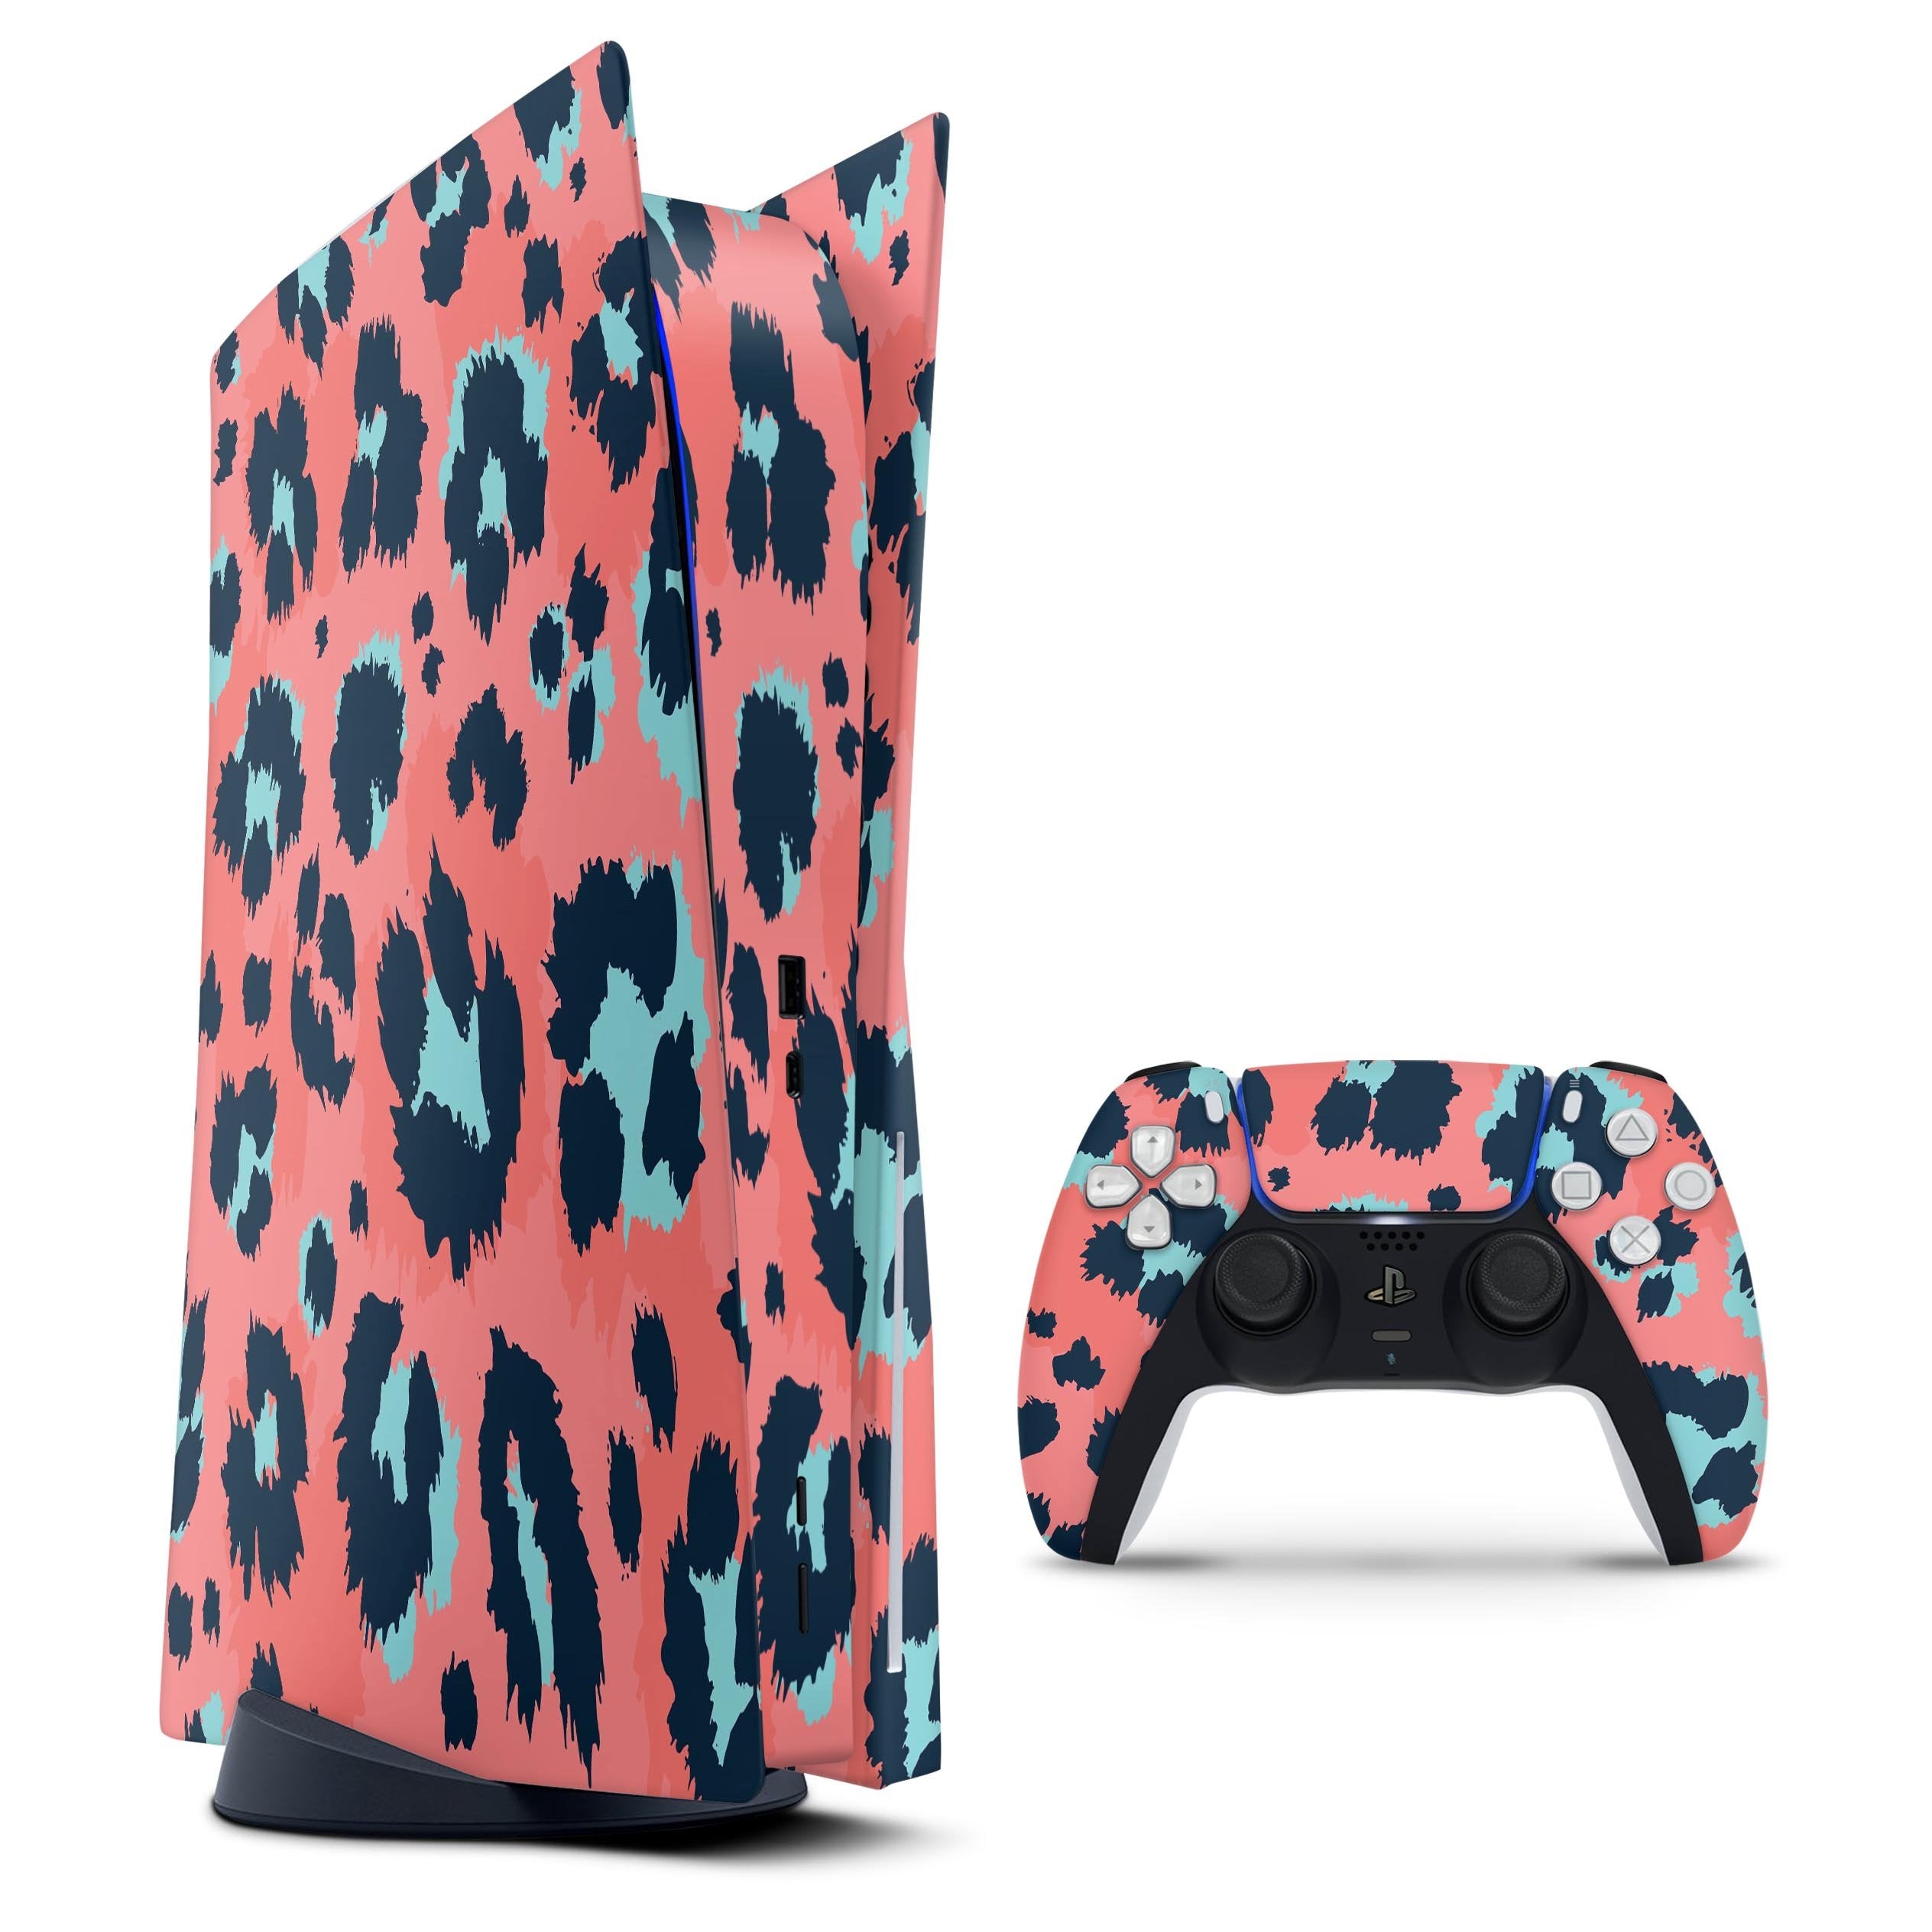 Leopard Coral and Teal - Full Vinyl decal Bundle for PlayStation 5